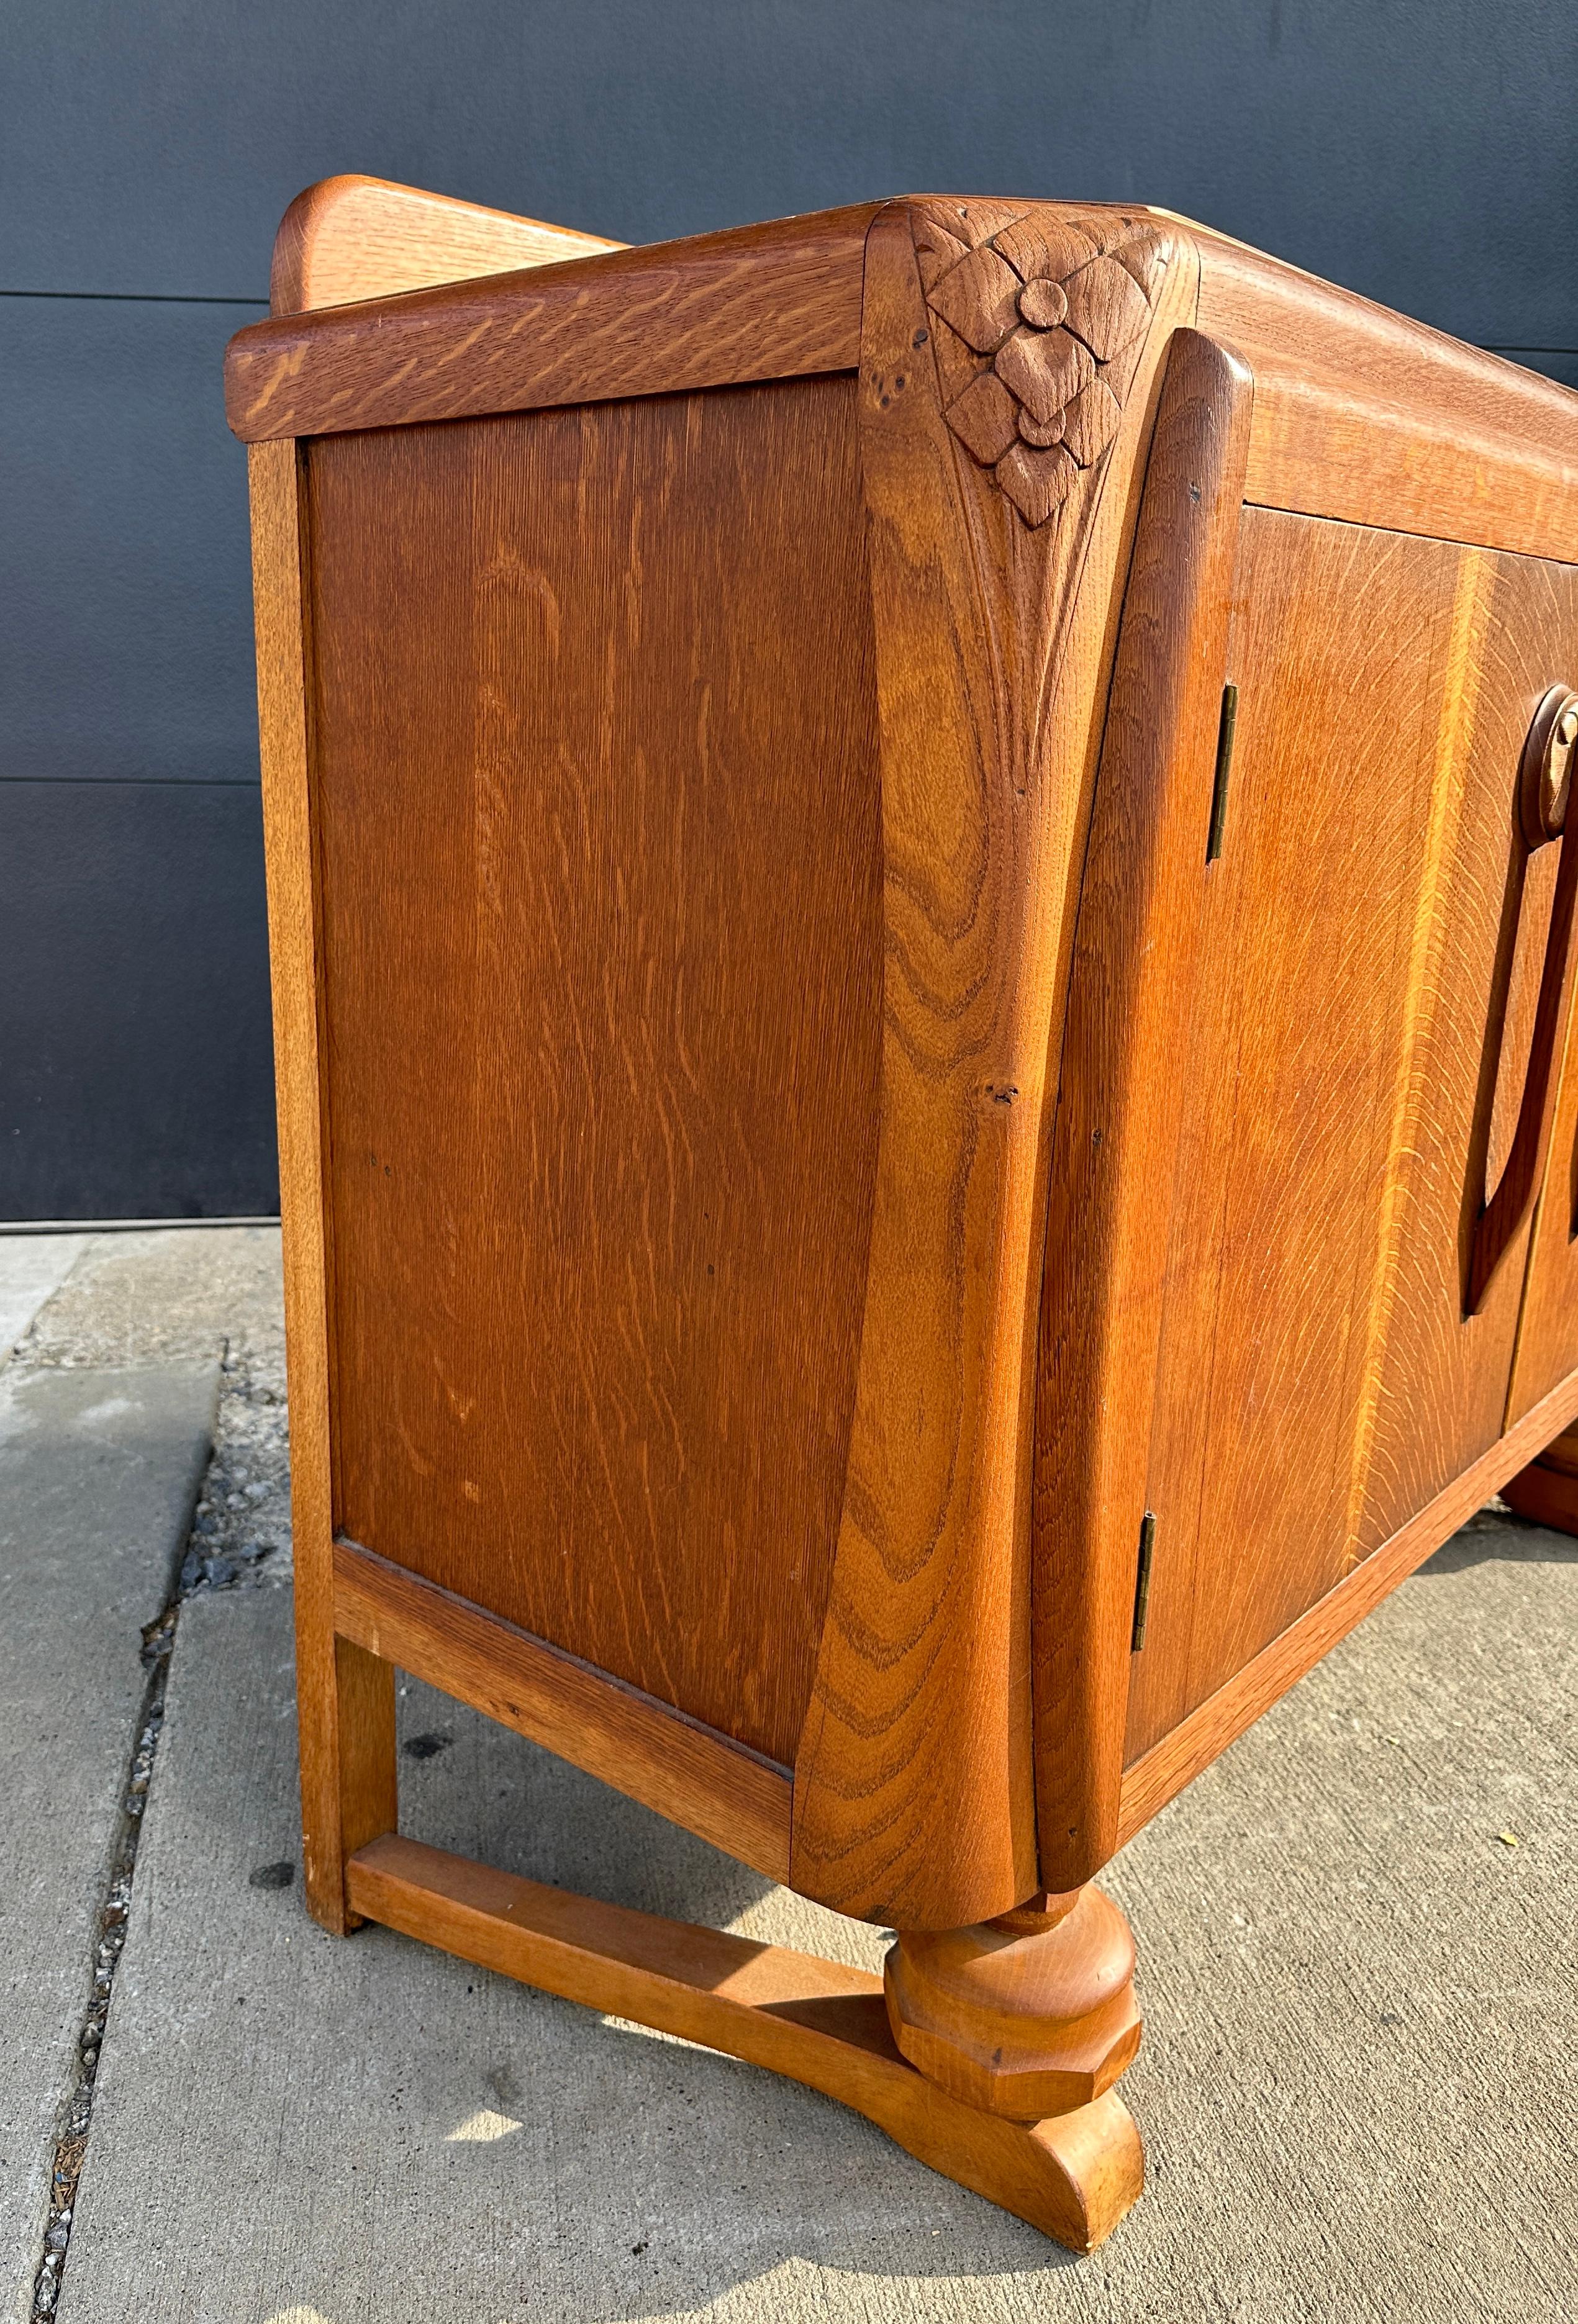 Oak Antique Art Deco Chest of Drawers / Sideboard Buffet / Console, circa 1920s